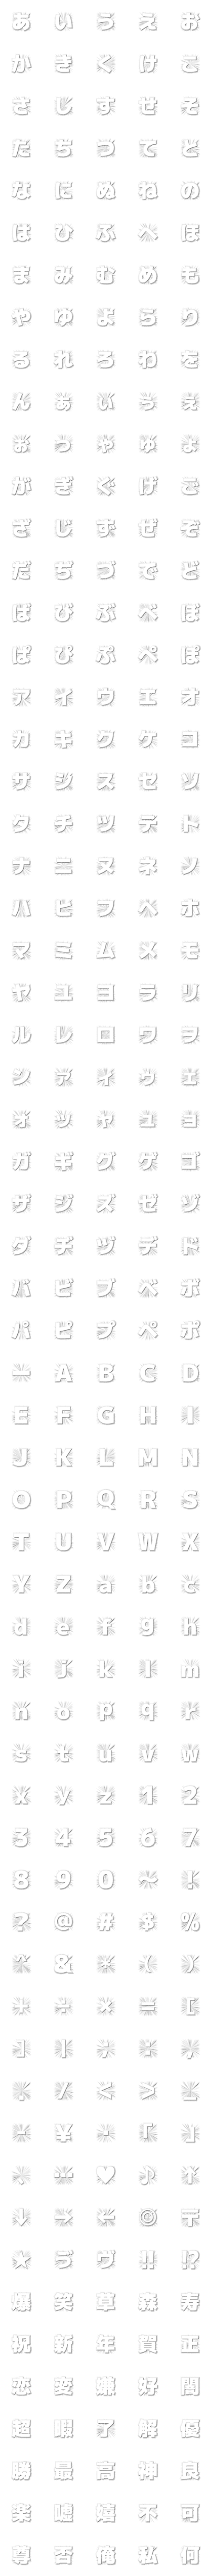 [LINE絵文字]集中線デコ文字 -ゴシック体-の画像一覧